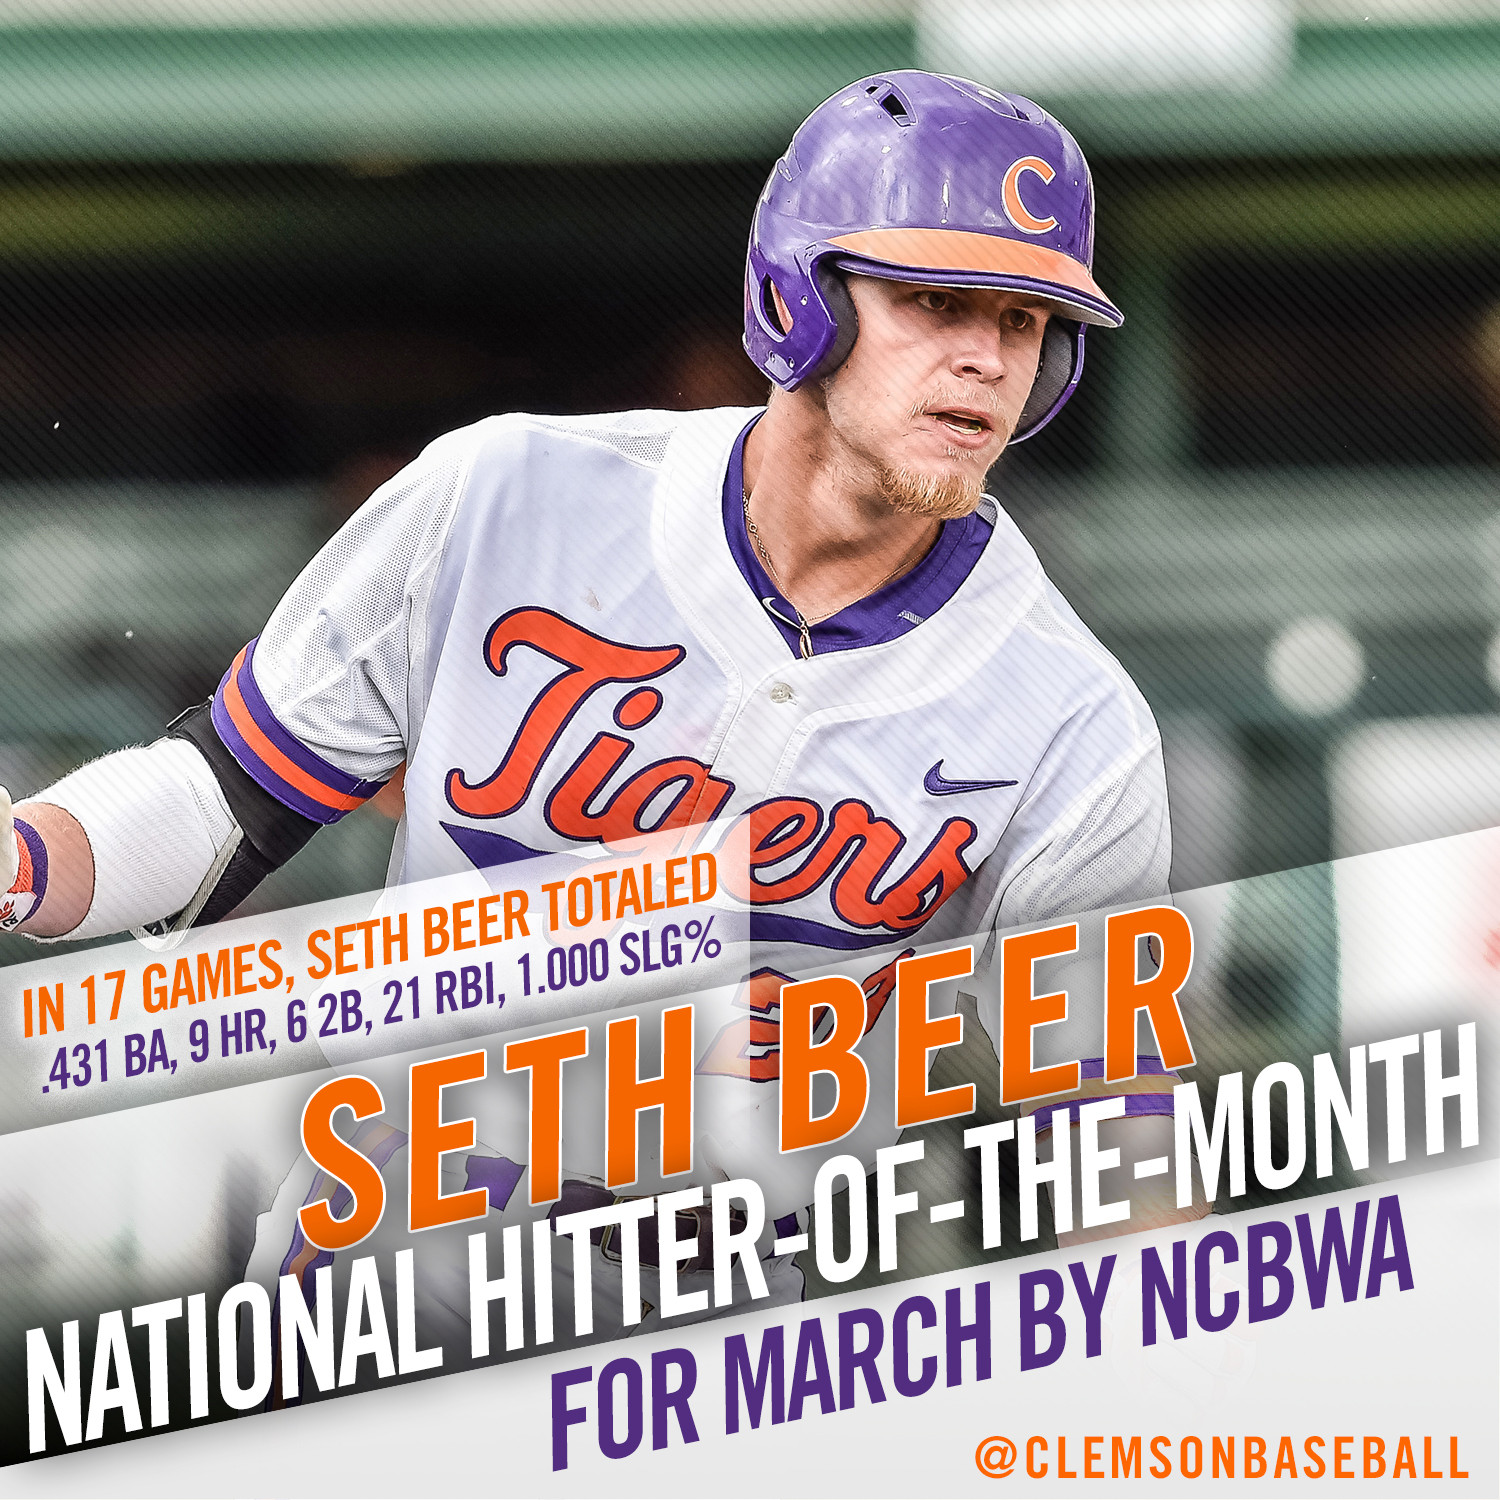 Beer Named Hitter-of-the-Month